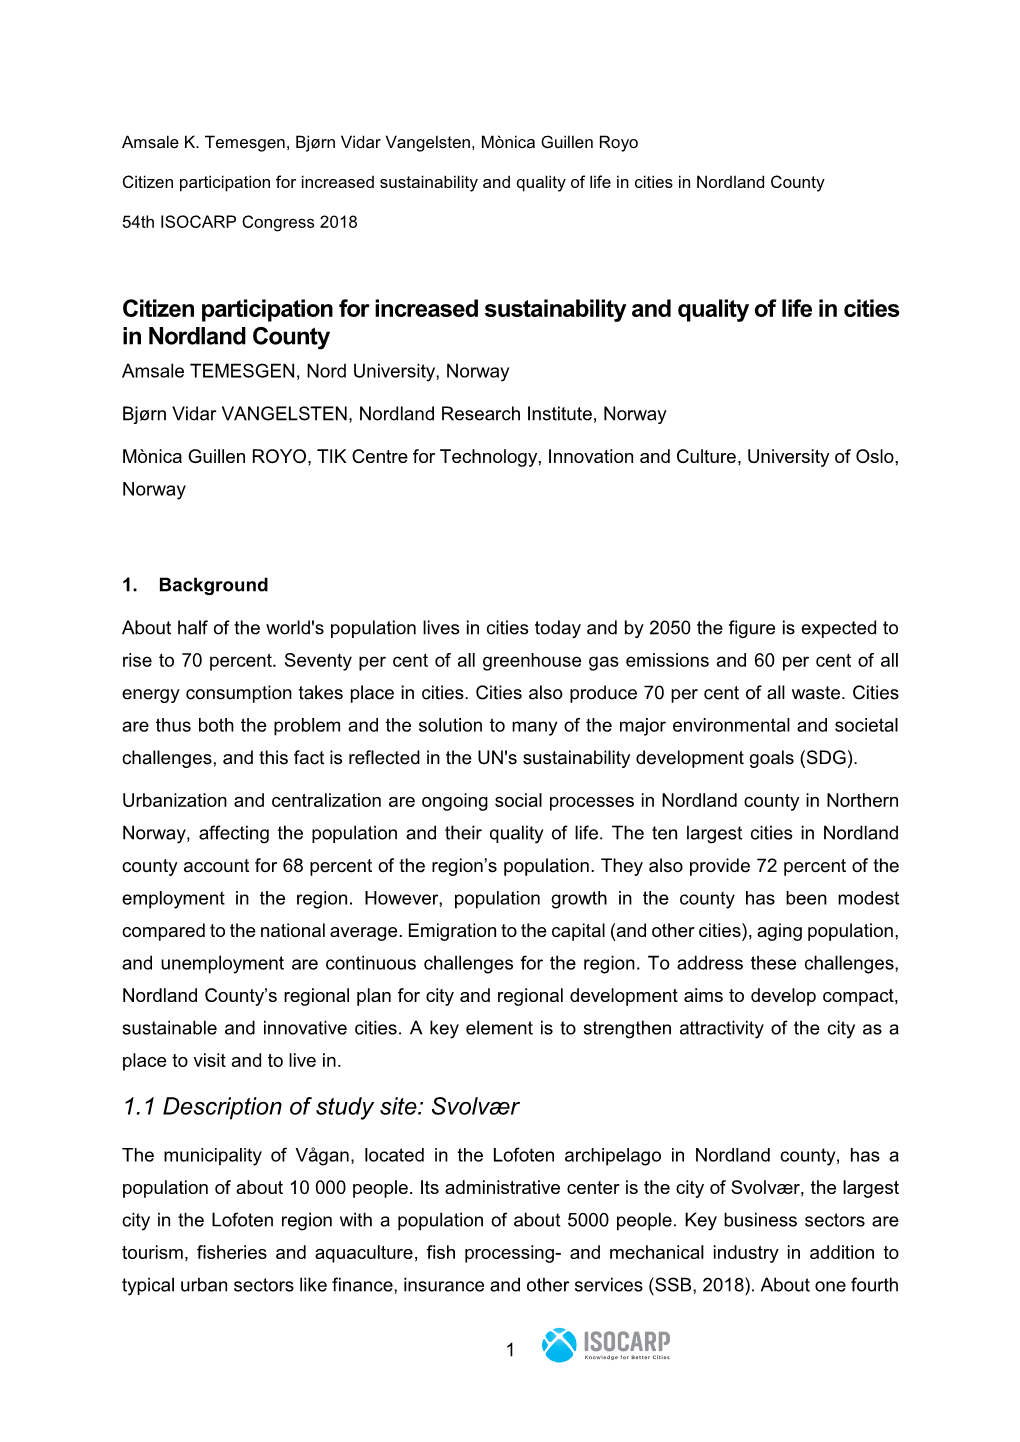 Citizen Participation for Increased Sustainability and Quality of Life in Cities in Nordland County